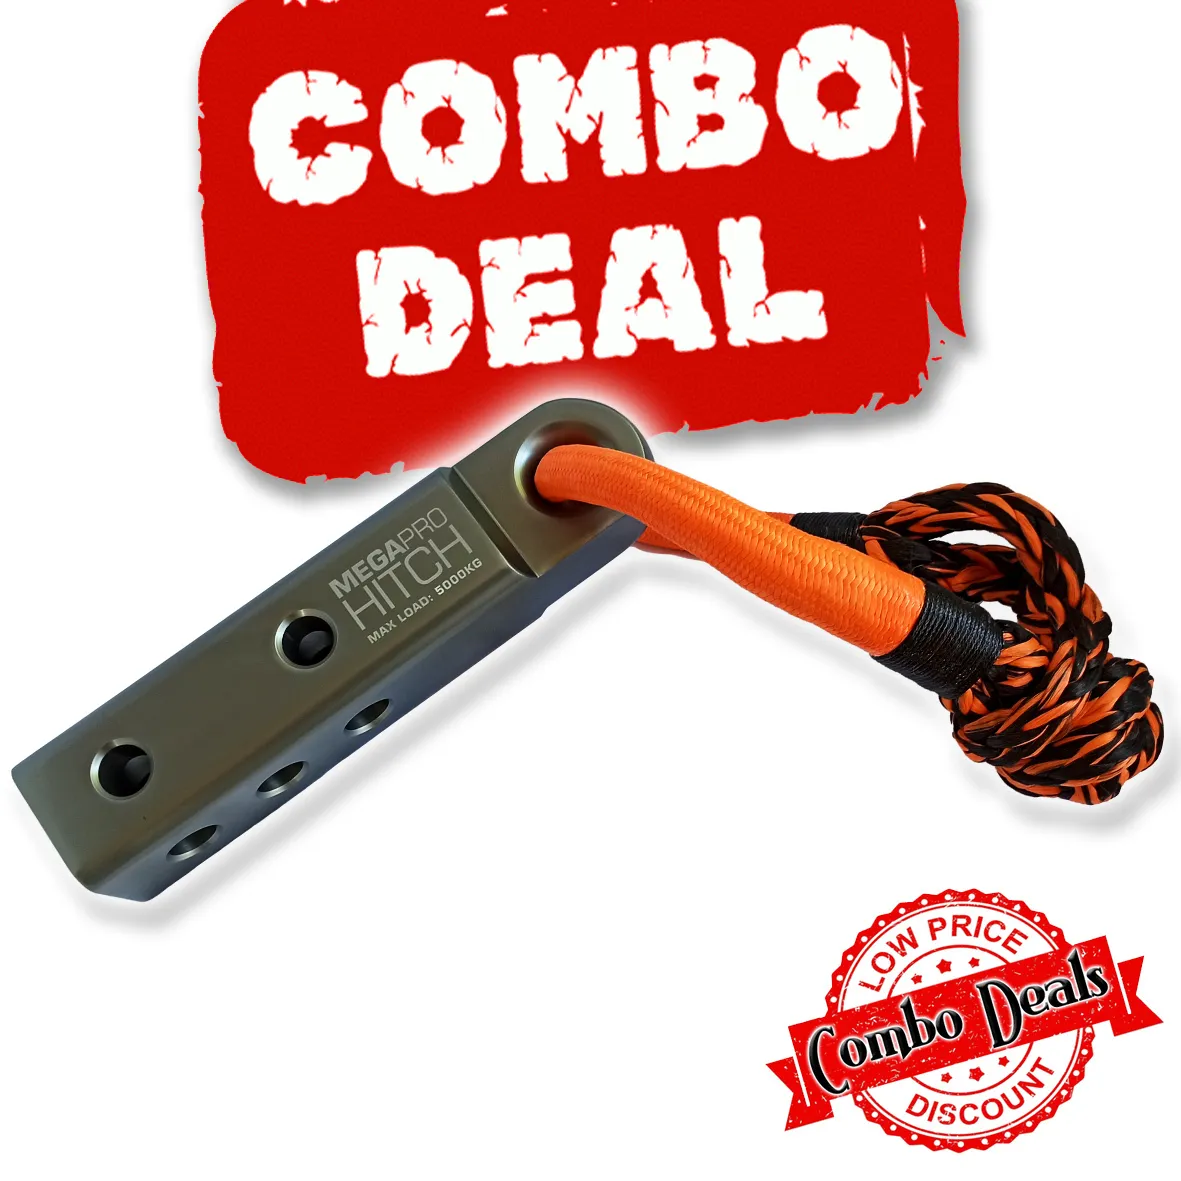 Carbon Recovery Hitch and Soft Shackle Combo Deal